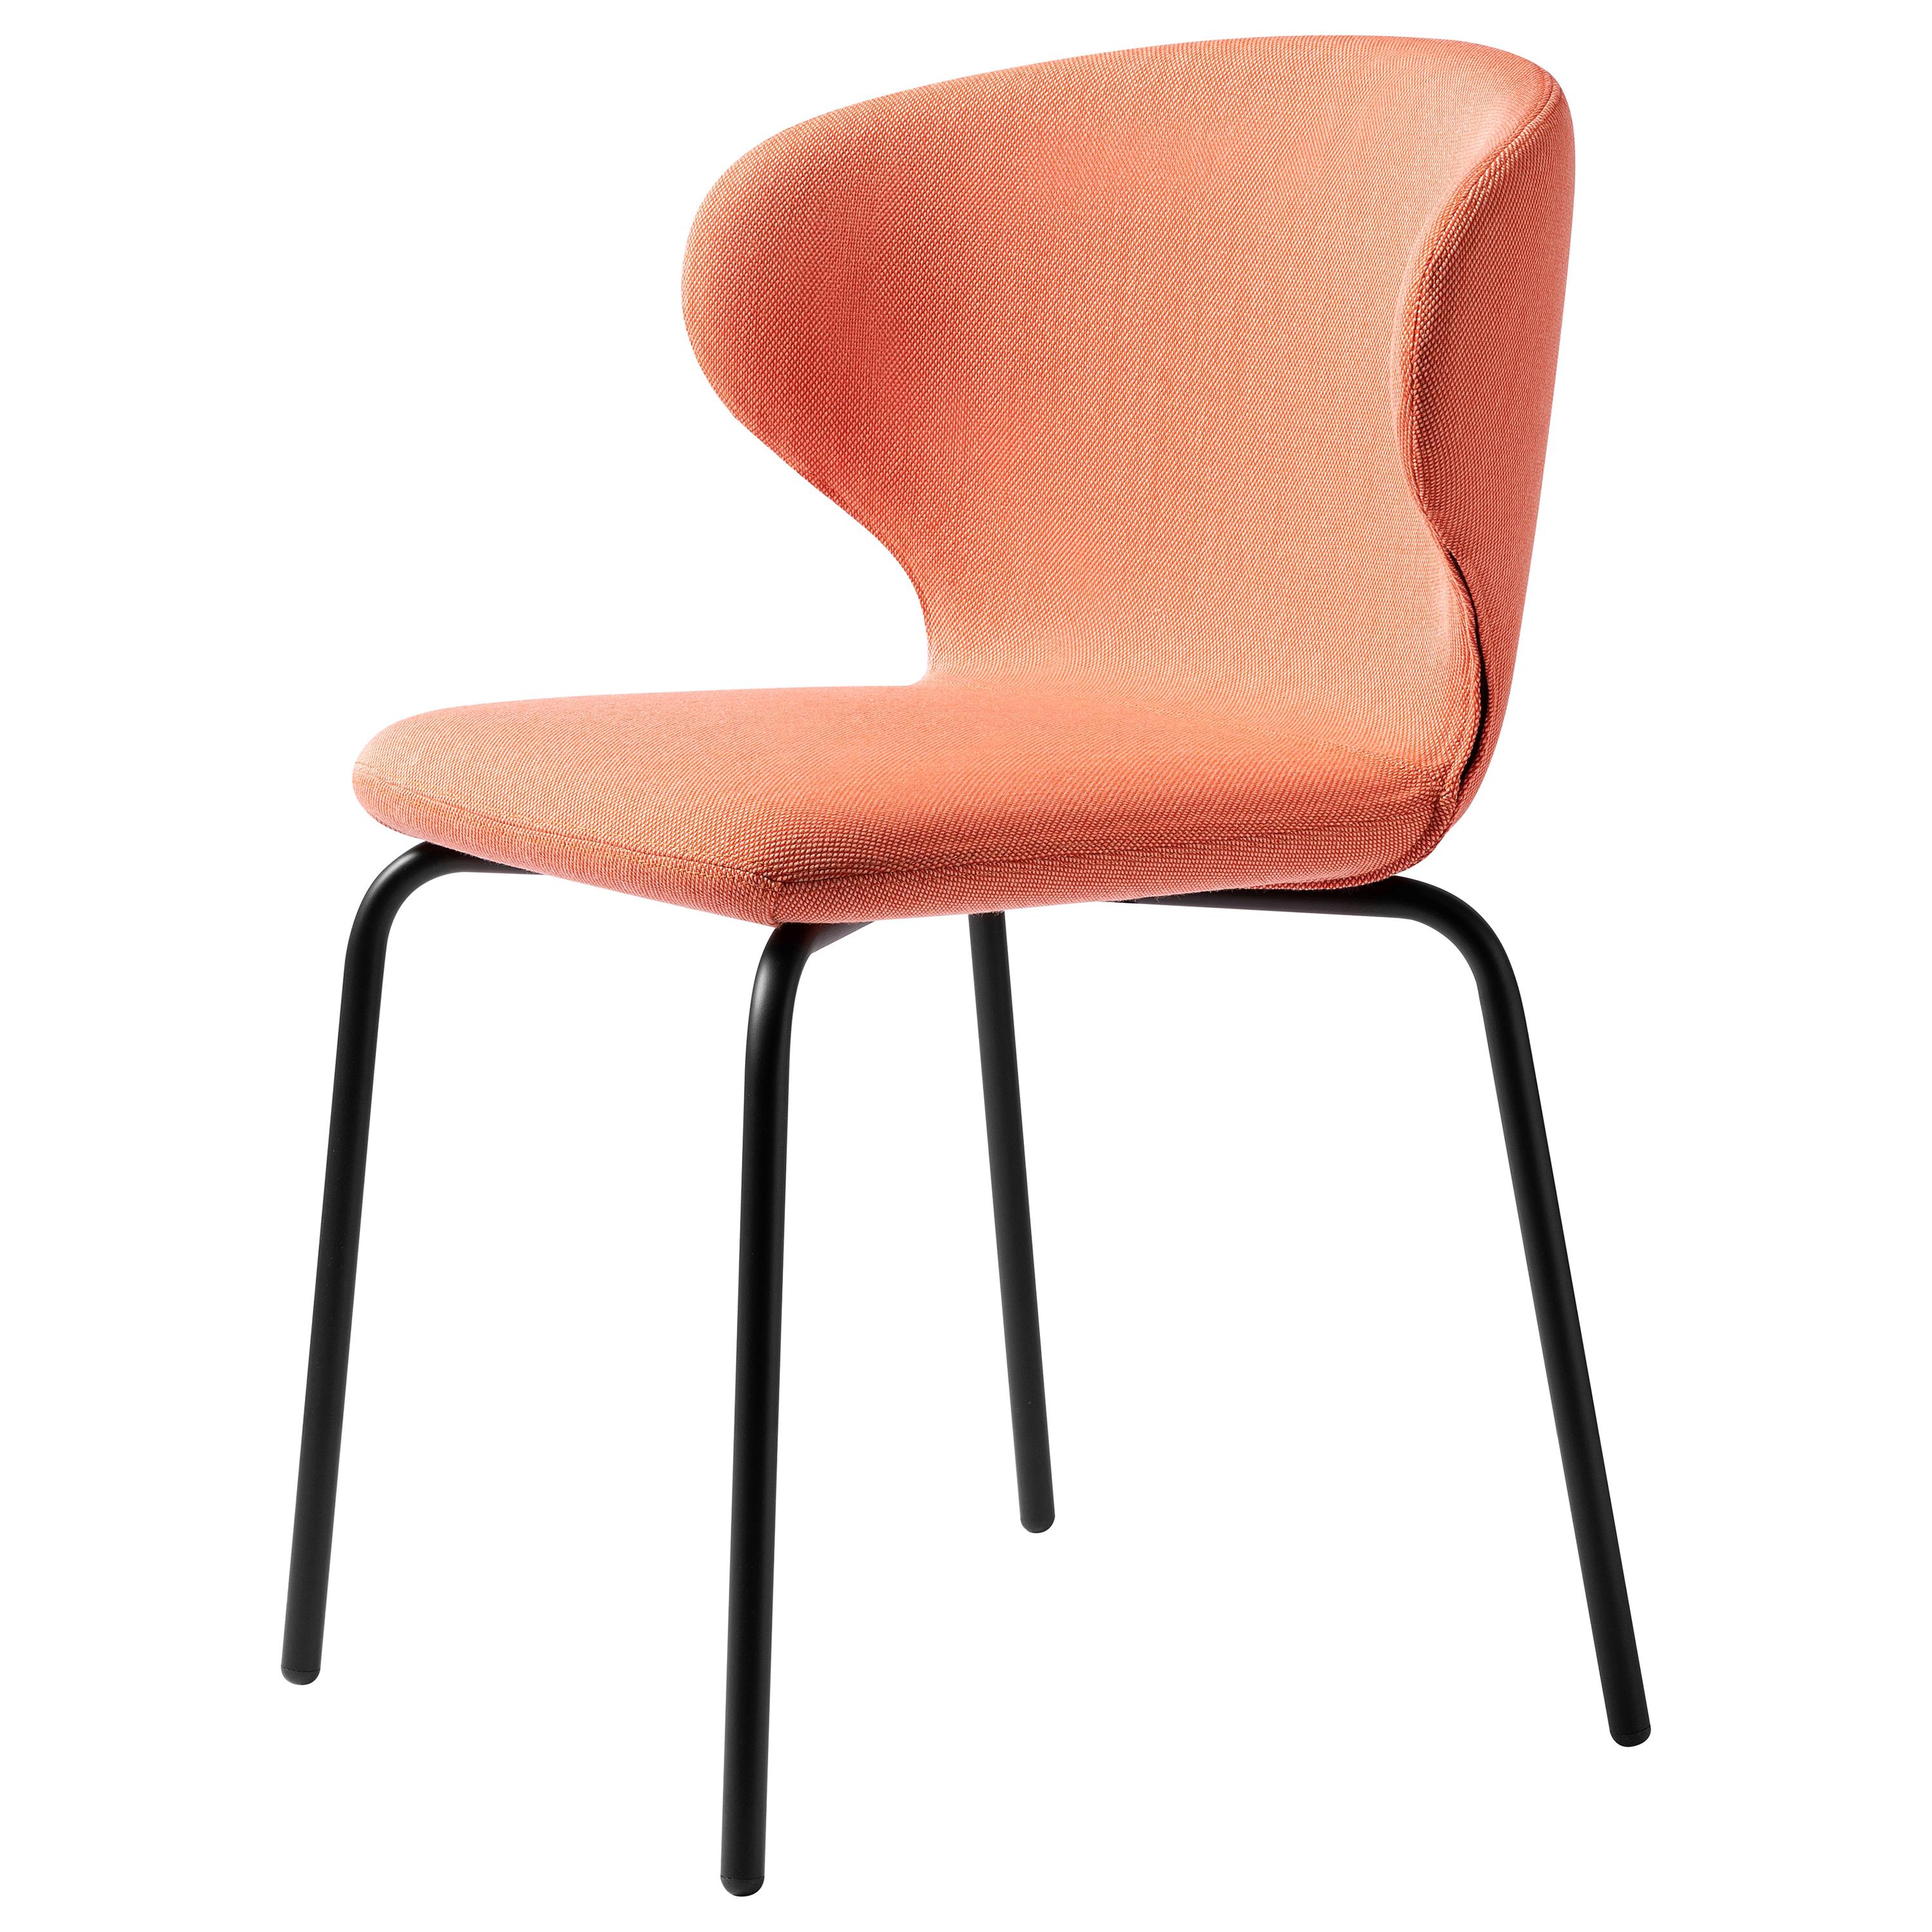 Mula Chair in Black Metal Leg Base with Upholstery Seat, by E-GGs